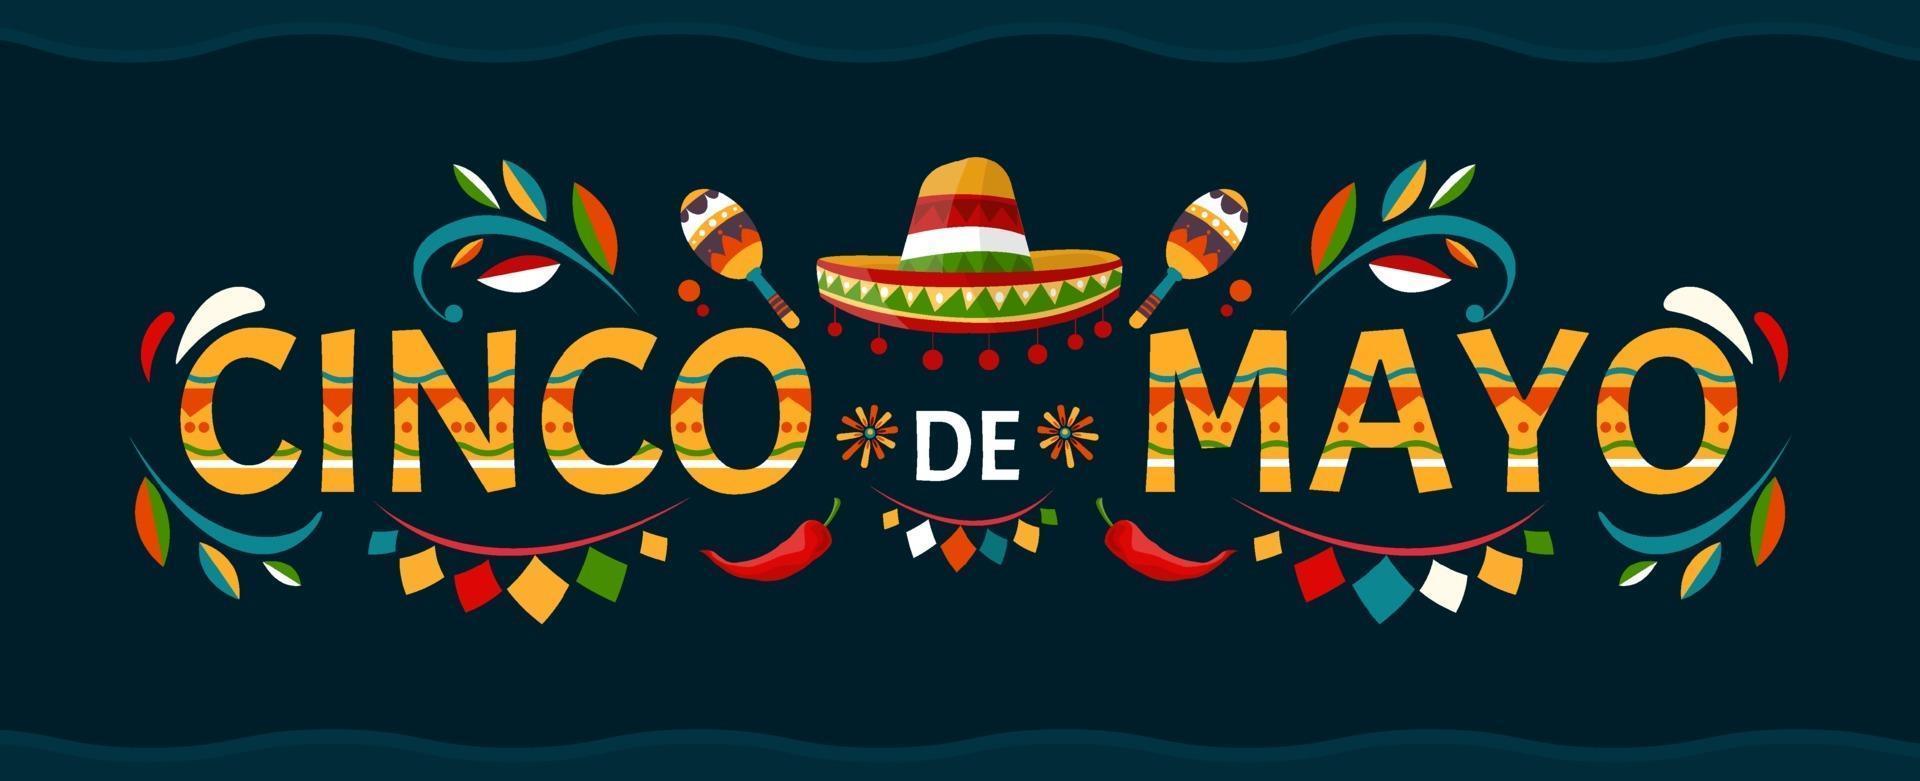 alcohol facts - facts about drinking - cinco de mayo